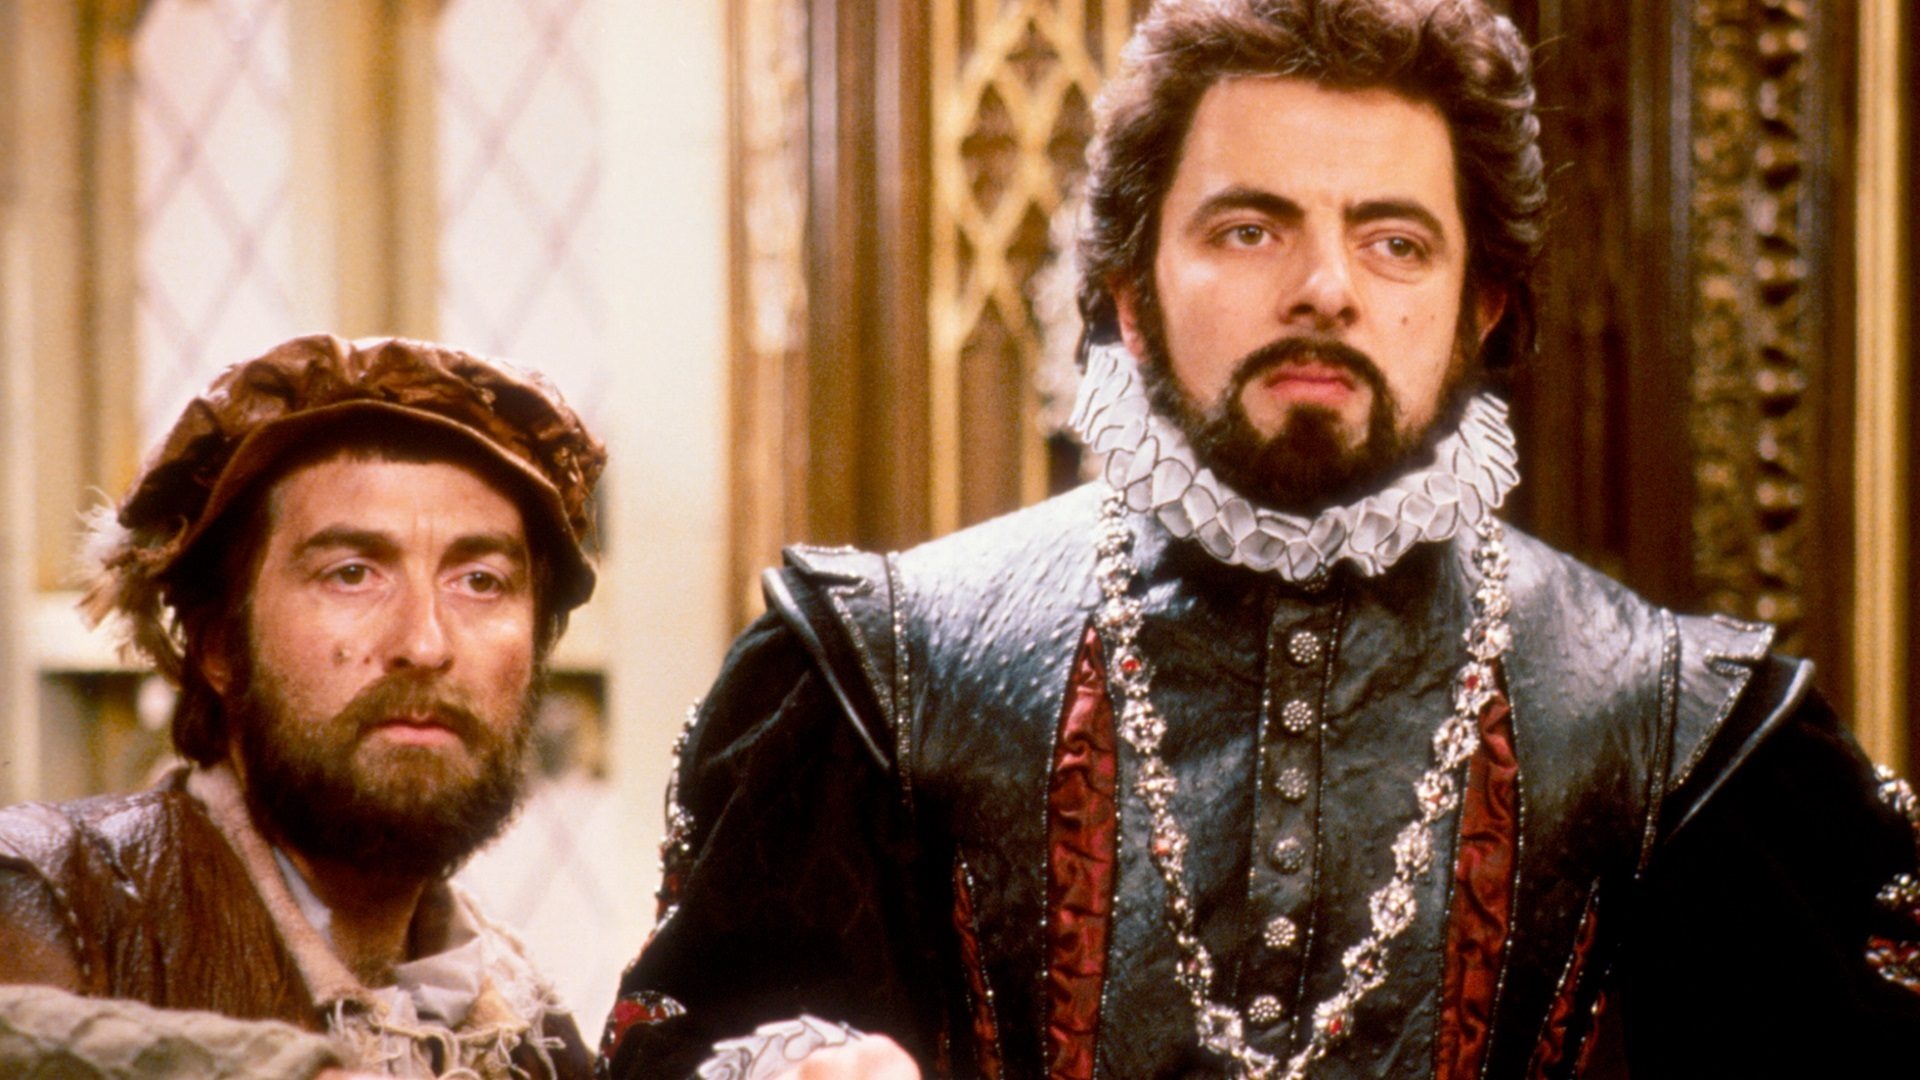 Rowan Atkinson: Edmund Blackadder, A series of four period British sitcoms, aired from 1983 to 1989. 1920x1080 Full HD Wallpaper.